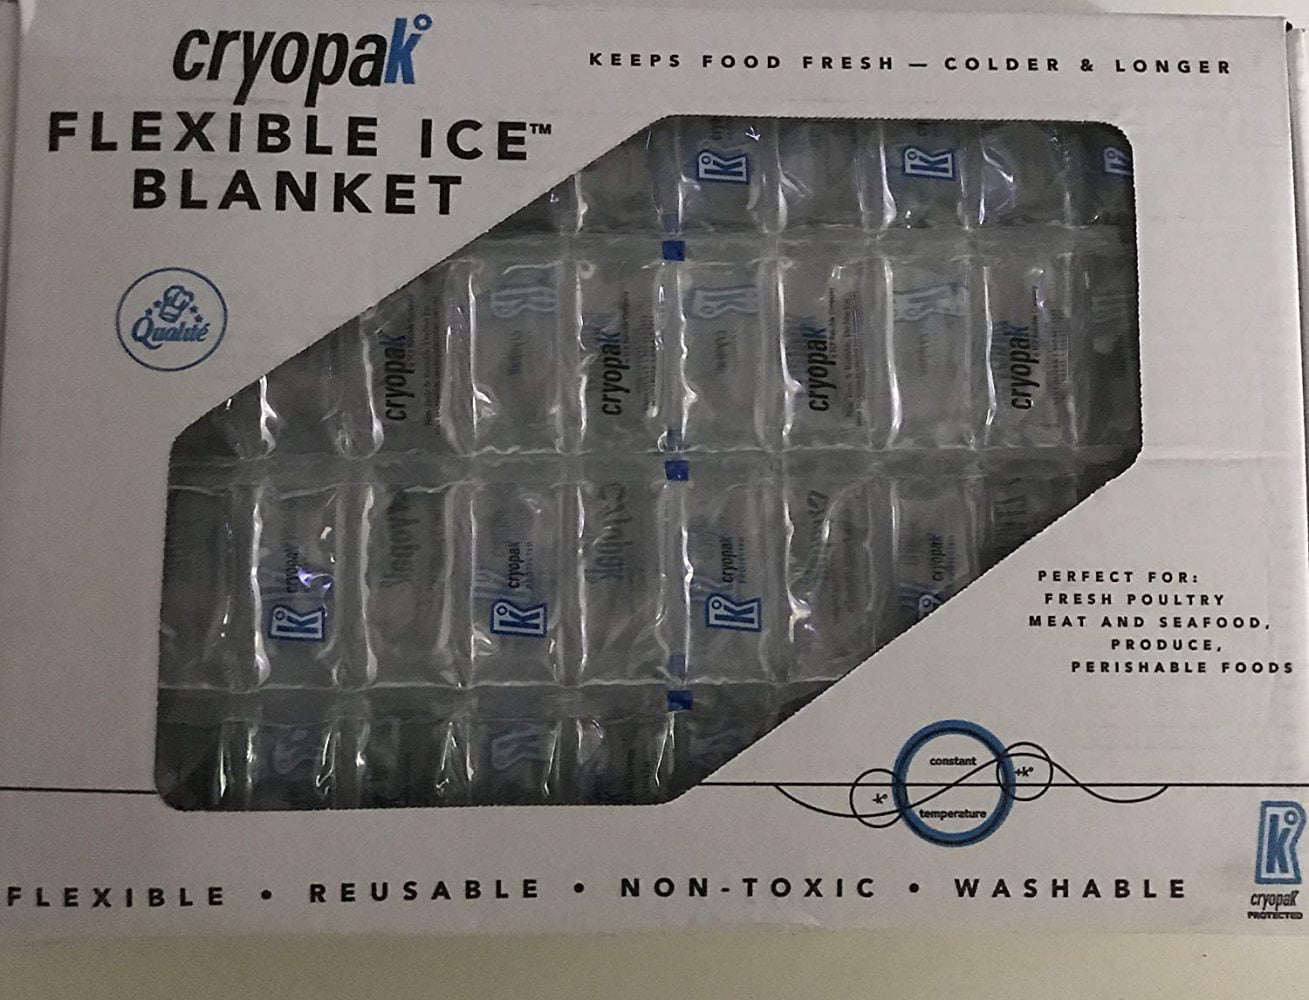 keep things cool on the hot summer day or Lunch Cryopak Flexible Ice Blanket 